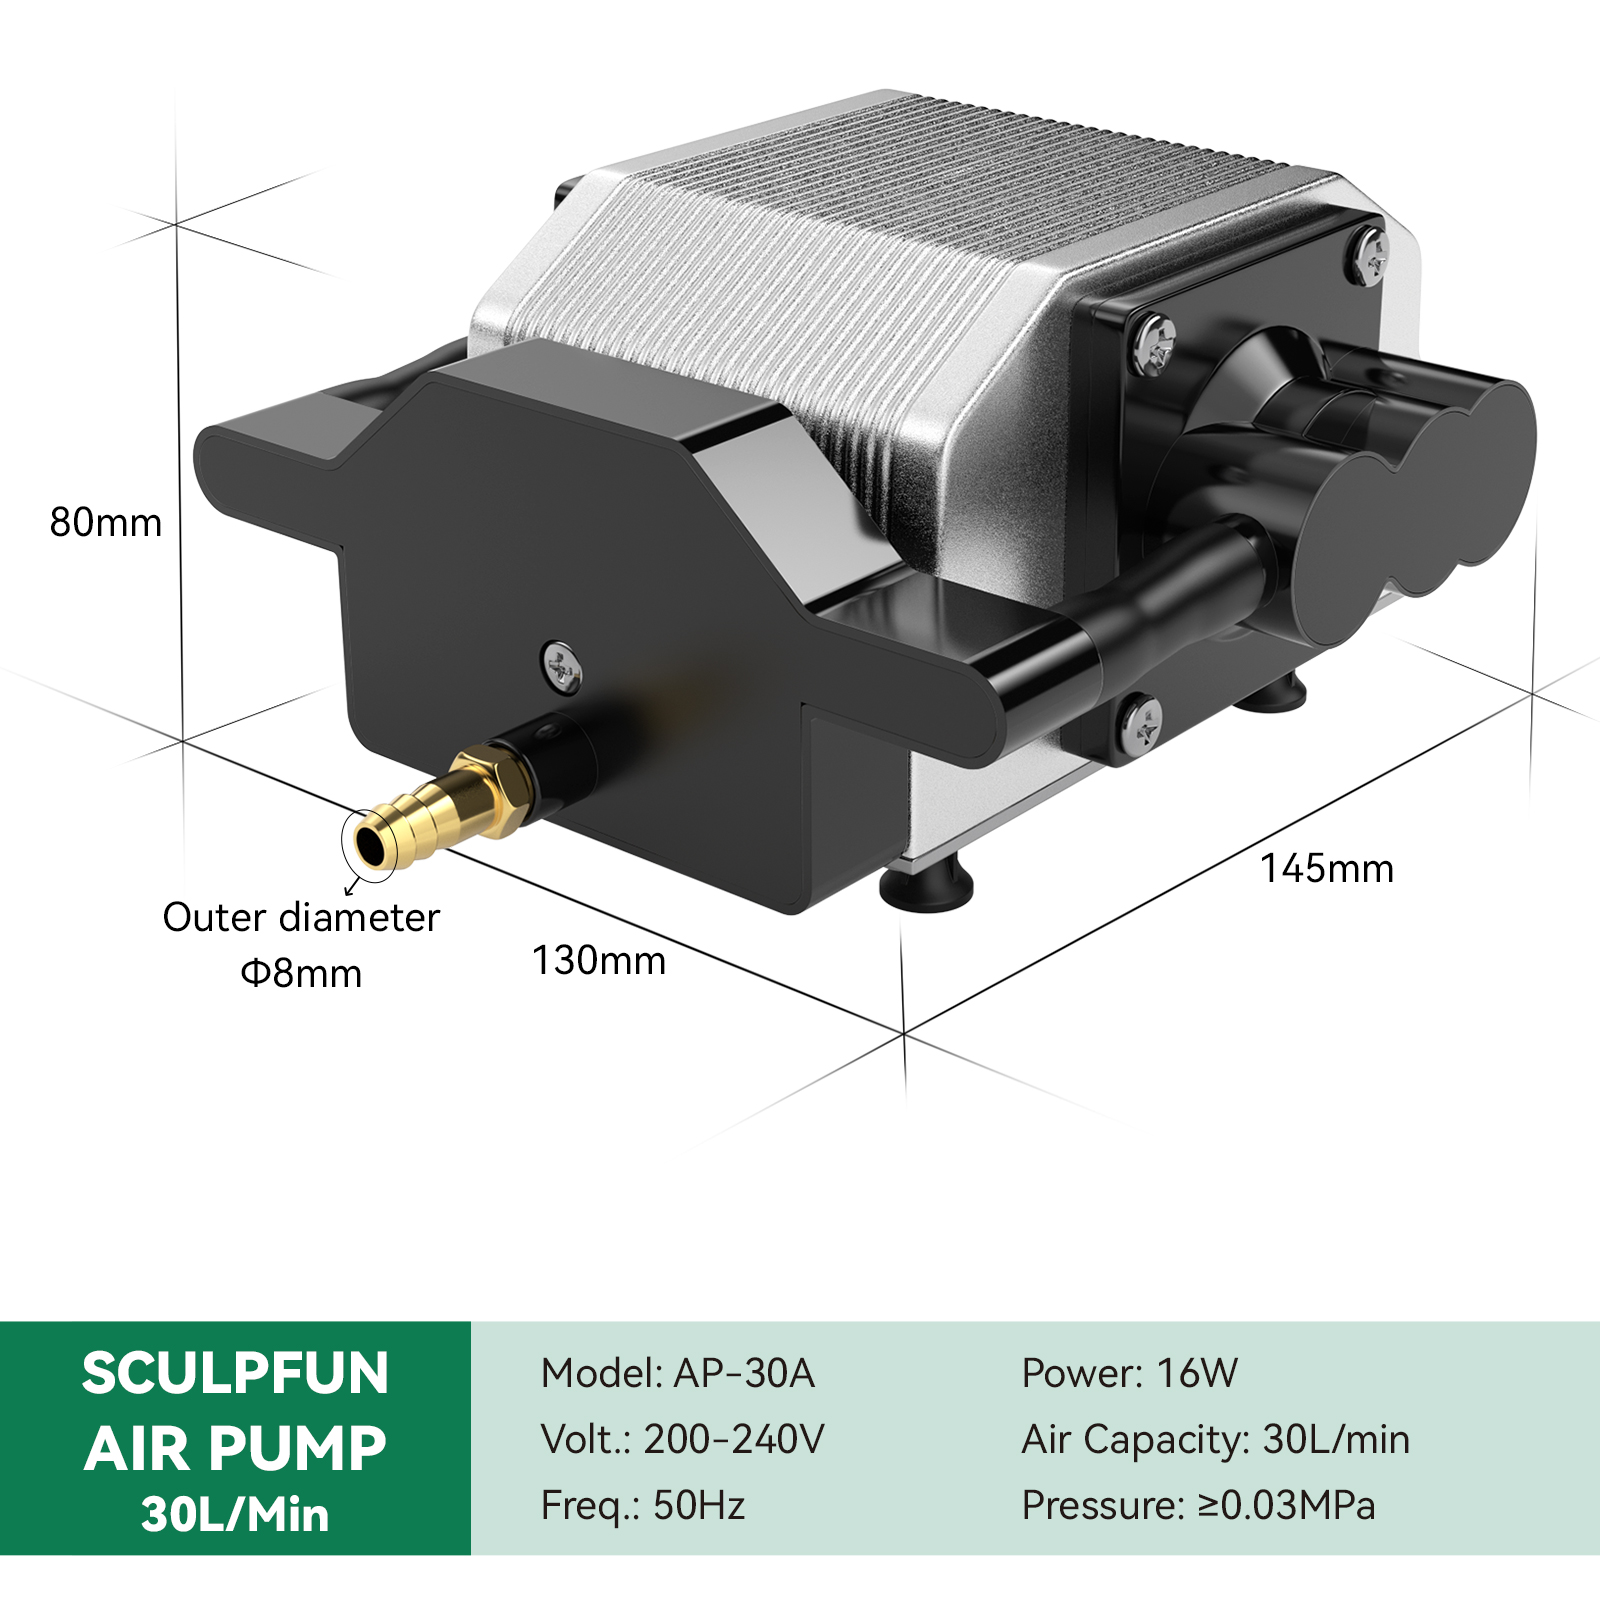 SCULPFUN-Air-Pump-Air-Compressor-220V-for-Laser-Engraving-Machine-Adjustable-Speed-Low-Noise-Low-Vib-1957800-6